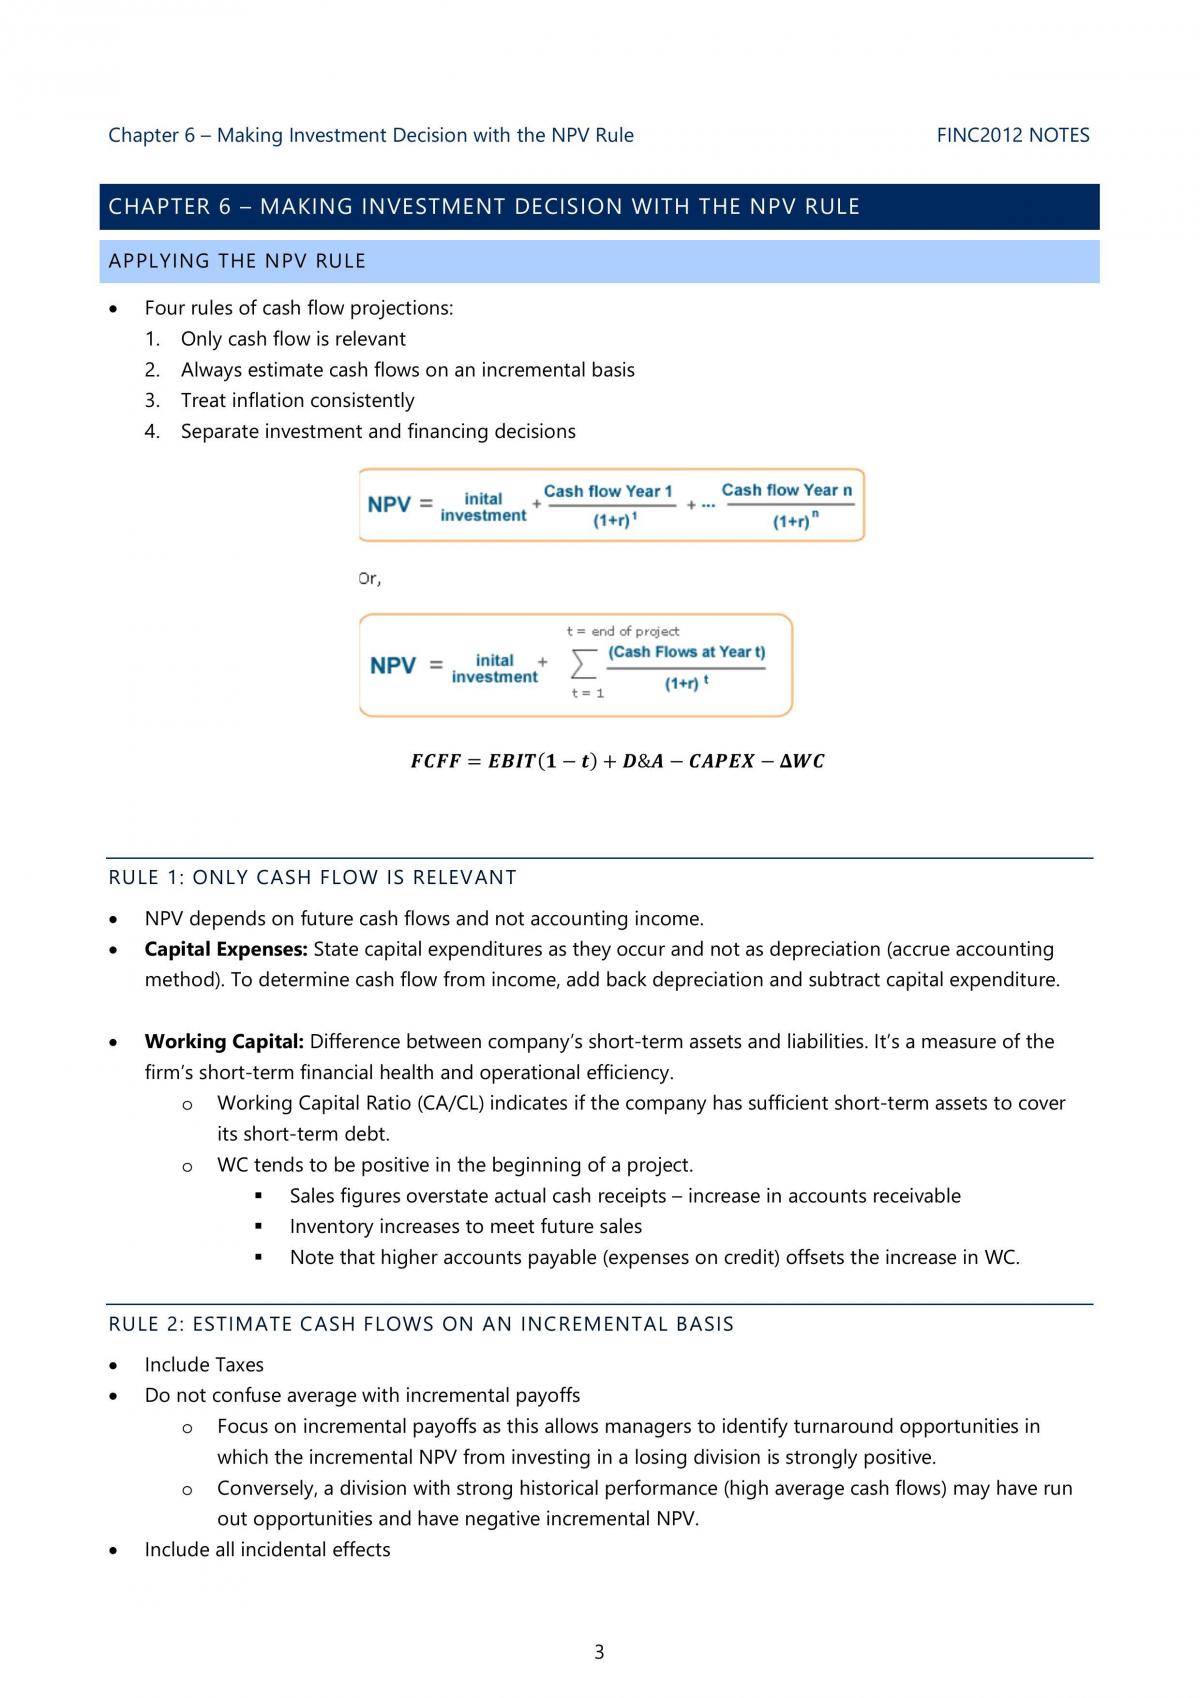 FINC2012 Full Study Notes - Page 3